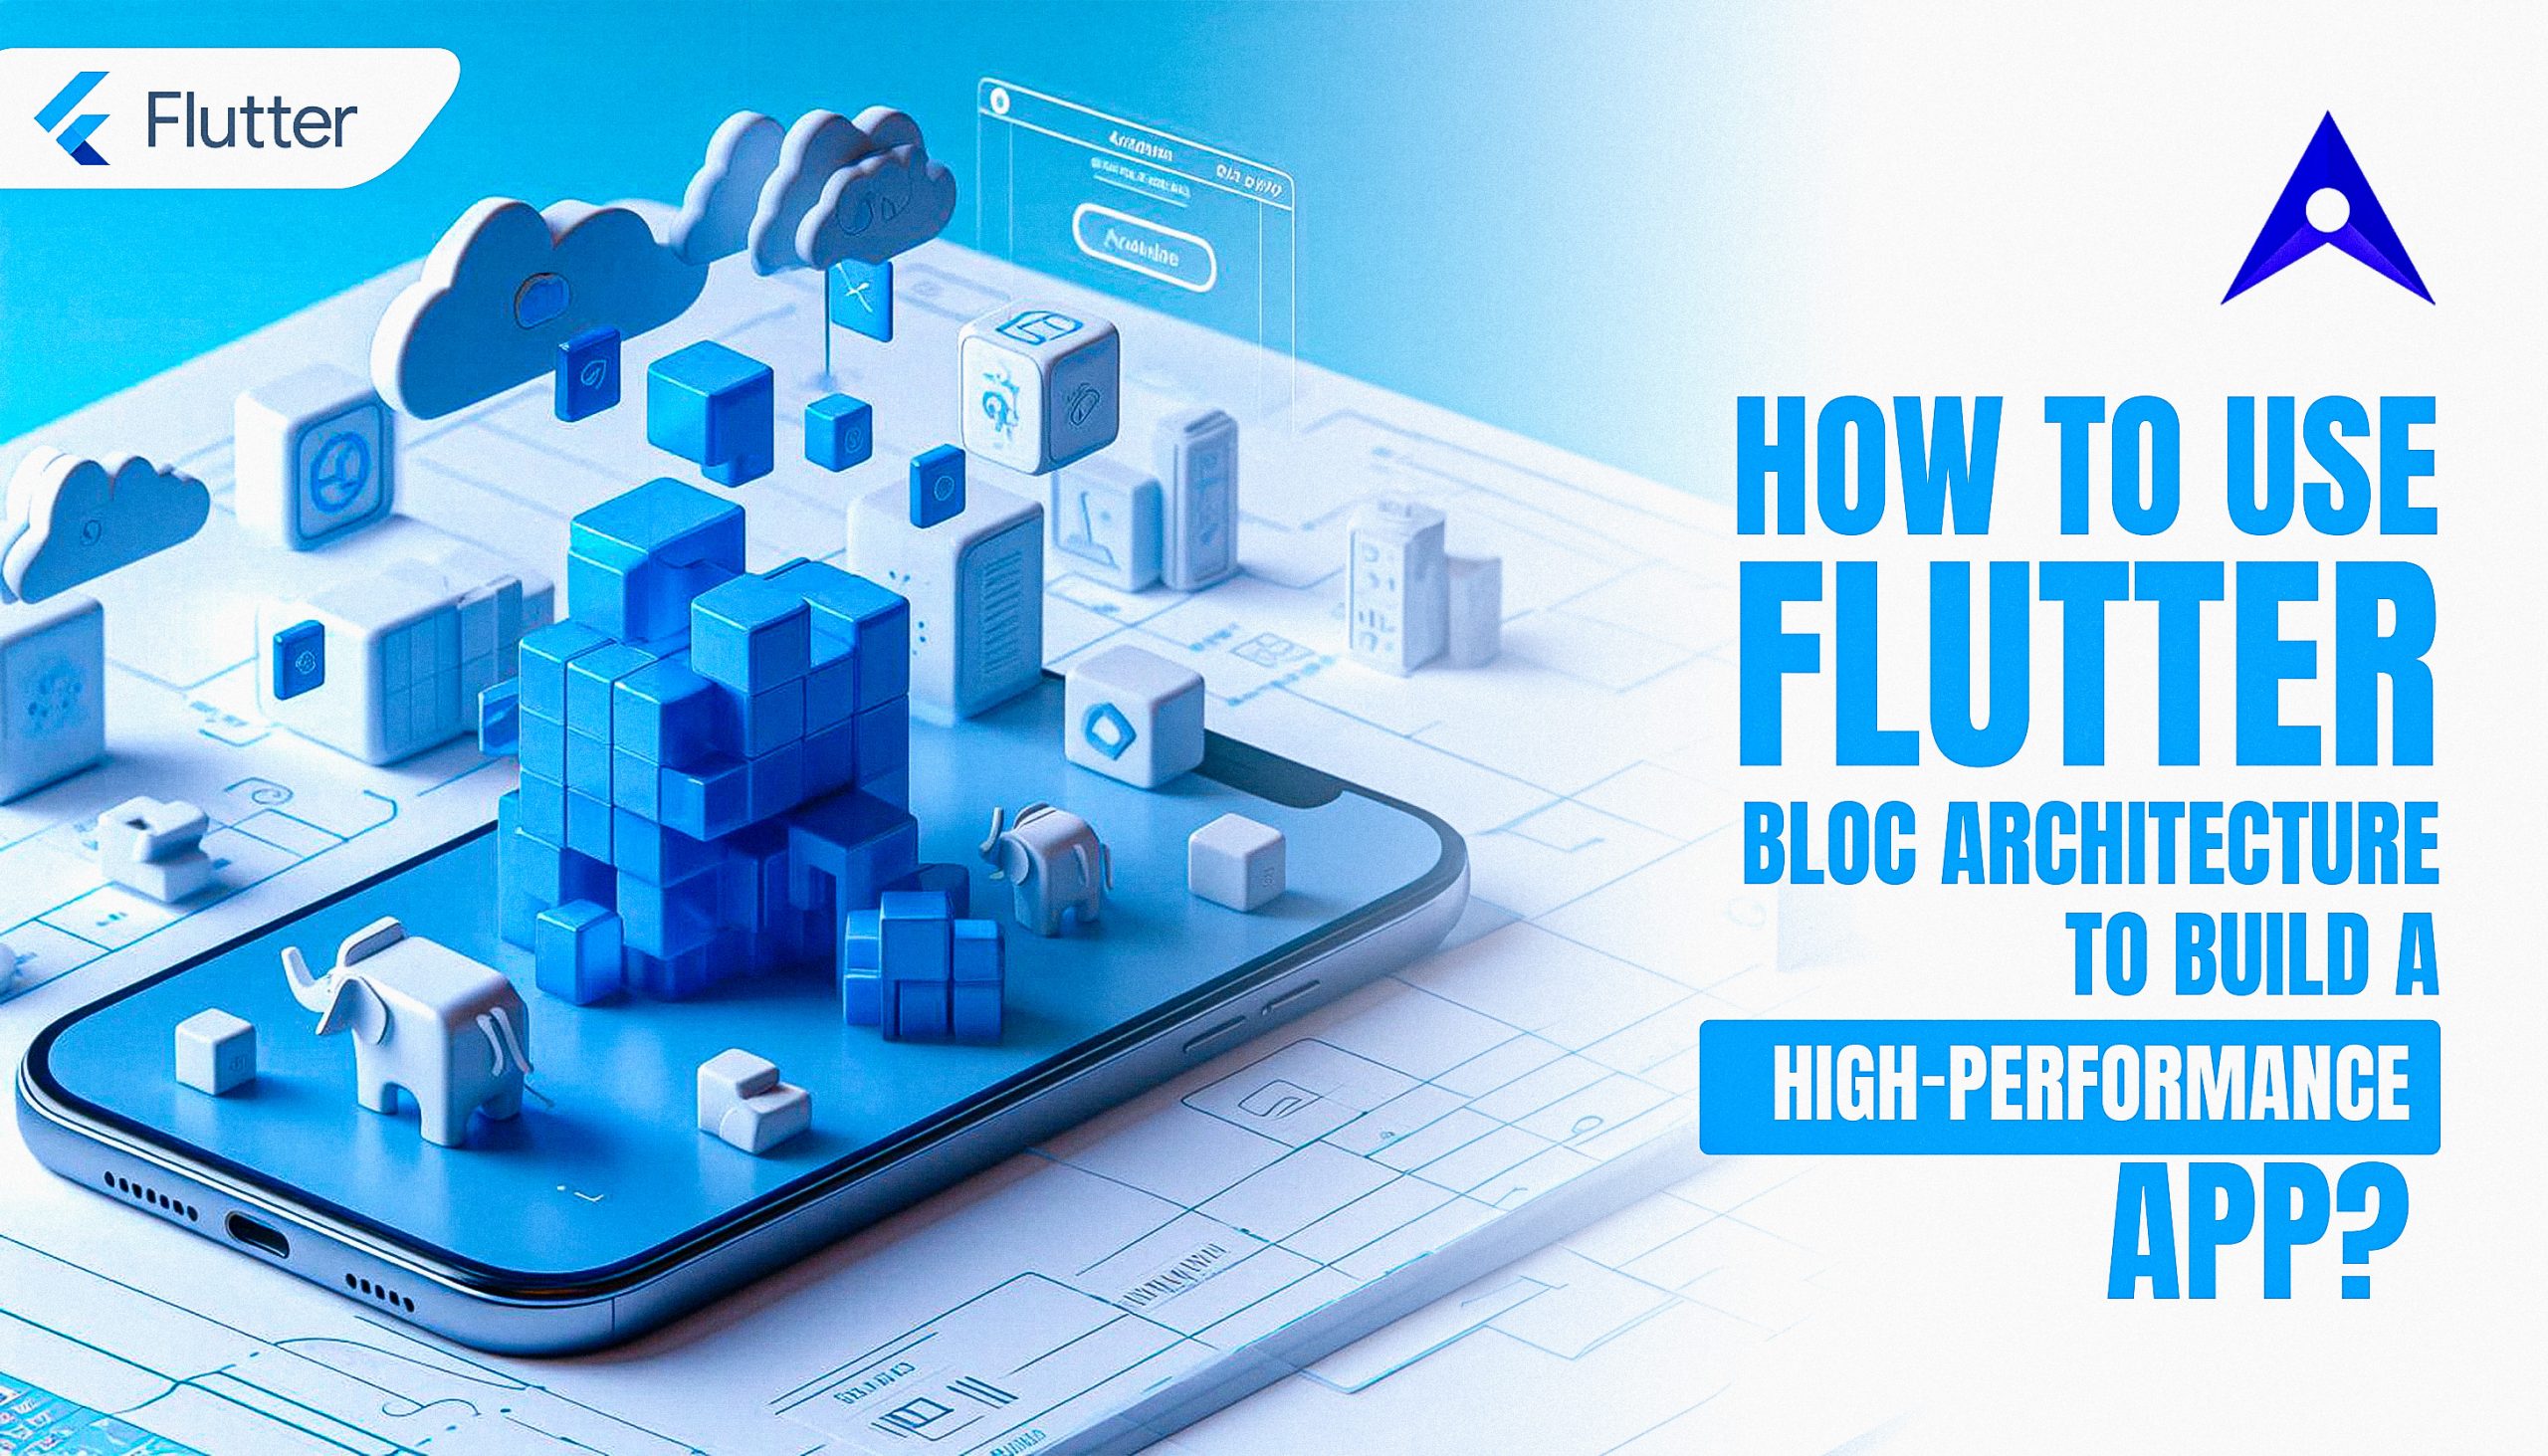 Flutter BLoC Architecture: How to Use It to Build High-Performance Apps